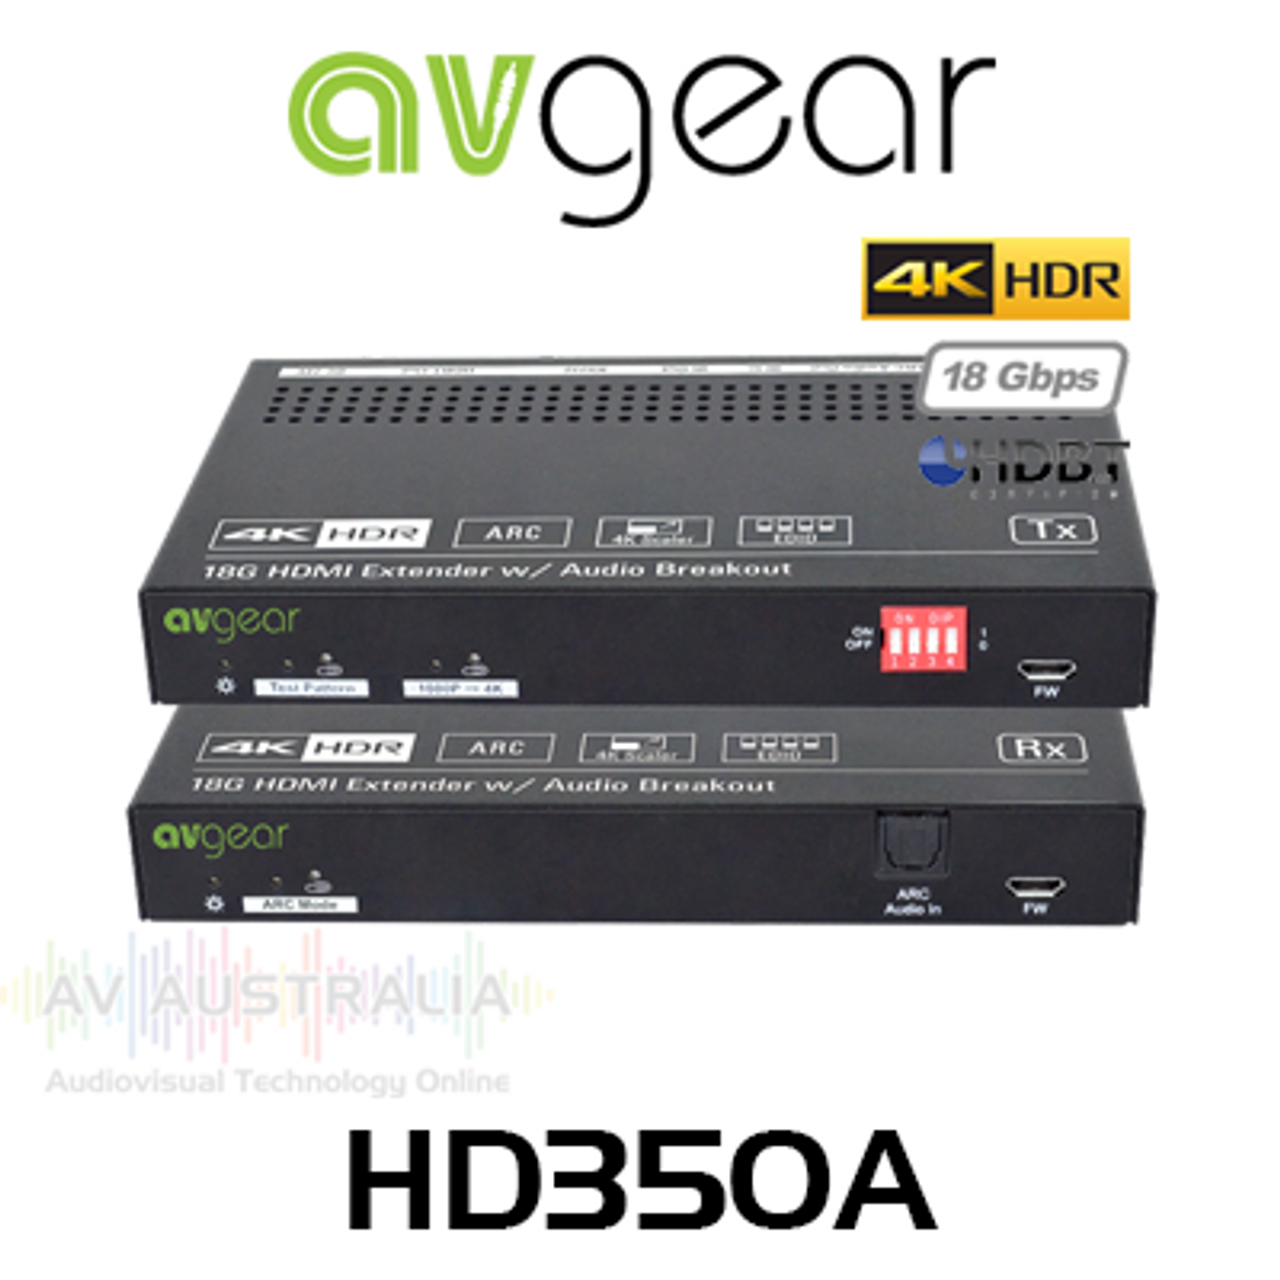 AVGear HD350A 4K HDR 18Gbps HDMI Over HDBaseT Extender Set w/ Audio Breakout (40M)